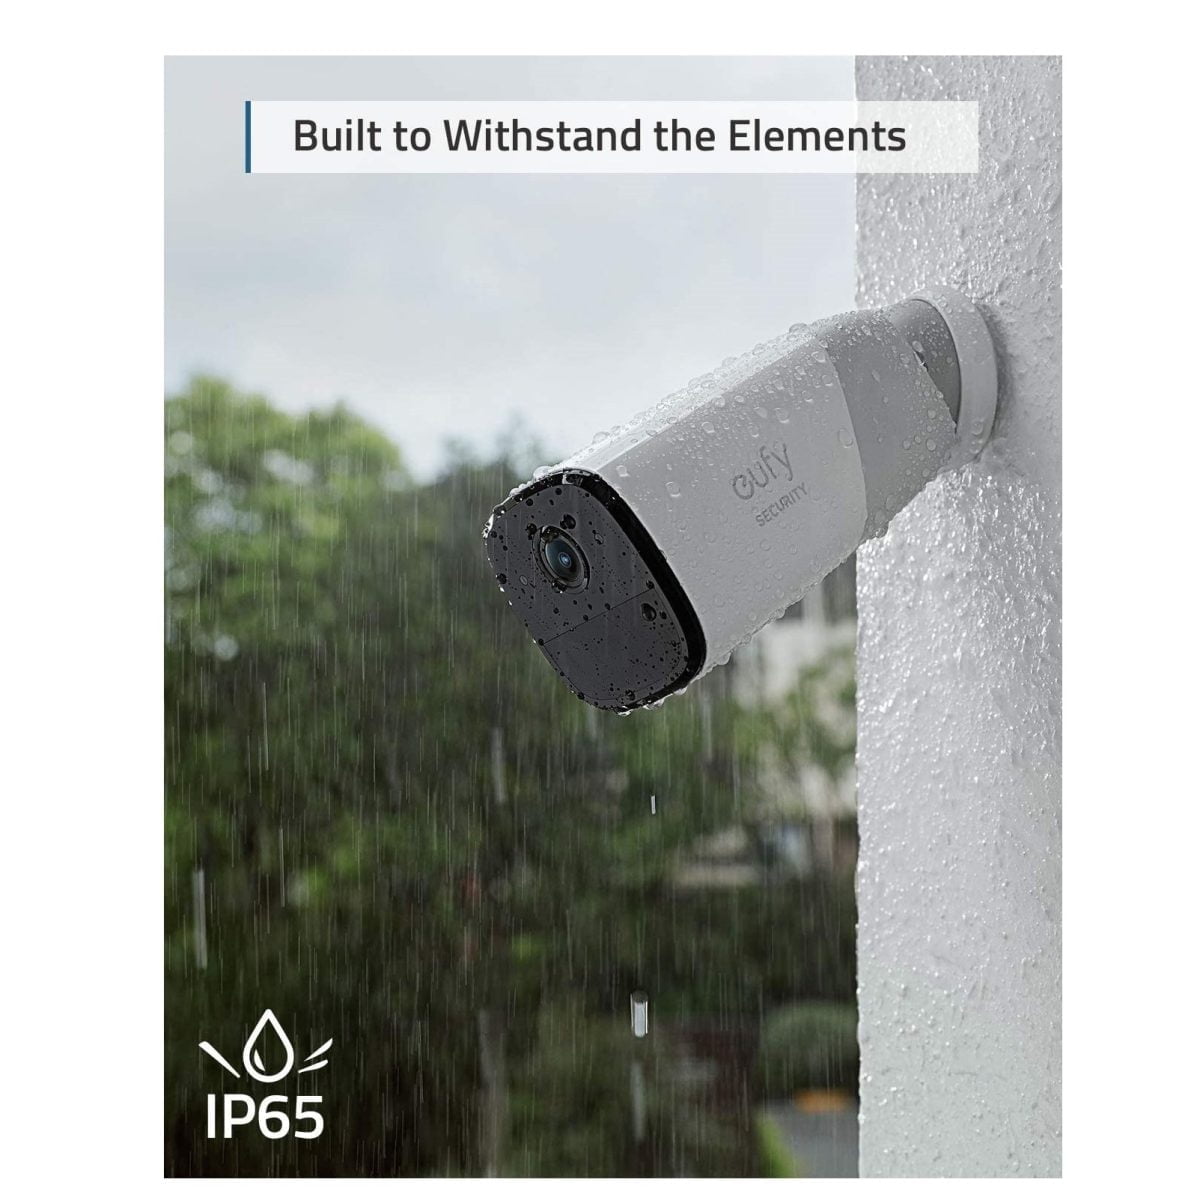 71Jiusnwxul. Ac Sl1500 Eufy &Lt;H1&Gt;Eufycam 2 Pro Wireless Home Security Add-On Camera 2K - White&Lt;/H1&Gt; &Lt;Div Id=&Quot;Featurebullets_Feature_Div&Quot; Class=&Quot;Celwidget&Quot; Data-Feature-Name=&Quot;Featurebullets&Quot; Data-Csa-C-Id=&Quot;Qcg8Yu-3H792W-G85Dch-P6Ekh3&Quot; Data-Cel-Widget=&Quot;Featurebullets_Feature_Div&Quot;&Gt; &Lt;Div Id=&Quot;Feature-Bullets&Quot; Class=&Quot;A-Section A-Spacing-Medium A-Spacing-Top-Small&Quot;&Gt; &Lt;Ul Class=&Quot;A-Unordered-List A-Vertical A-Spacing-Mini&Quot;&Gt; &Lt;Li&Gt;&Lt;Span Class=&Quot;A-List-Item&Quot;&Gt;2K Resolution: When It Comes To Security, The Key Is In The Detail. See Exactly What Is Happening In And Around Your Home In Crisp 2K Clarity.&Lt;/Span&Gt;&Lt;/Li&Gt; &Lt;Li&Gt;&Lt;Span Class=&Quot;A-List-Item&Quot;&Gt;A Year’s Security From 1 Charge: Avoid Frequent Trips To Charge The Battery And Enjoy 365-Day Battery Life From Just One Charge.&Lt;/Span&Gt;&Lt;/Li&Gt; &Lt;Li&Gt;&Lt;Span Class=&Quot;A-List-Item&Quot;&Gt;Advanced Night Vision: The State-Of-The-Art Sony Sensor Allows For Detailed Recordings And Streaming In Low-Light Scenarios.&Lt;/Span&Gt;&Lt;/Li&Gt; &Lt;Li&Gt;&Lt;Span Class=&Quot;A-List-Item&Quot;&Gt;Ready For Any Weather: With An Ip67 Weather Proof-Rating, Eufycam 2 Pro Is Built To Withstand The Elements.&Lt;/Span&Gt;&Lt;/Li&Gt; &Lt;/Ul&Gt; &Lt;Pre&Gt;&Lt;Strong&Gt;&Lt;Span Class=&Quot;A-List-Item&Quot;&Gt;Requires Eufy Security Homebase 2 One Year Eufy Warranty&Lt;/Span&Gt;&Lt;/Strong&Gt;&Lt;/Pre&Gt; &Lt;/Div&Gt; &Lt;/Div&Gt; Security Add-On Camera Eufycam 2 Pro Wireless Home Security Add-On Camera 2K - White T81403D2